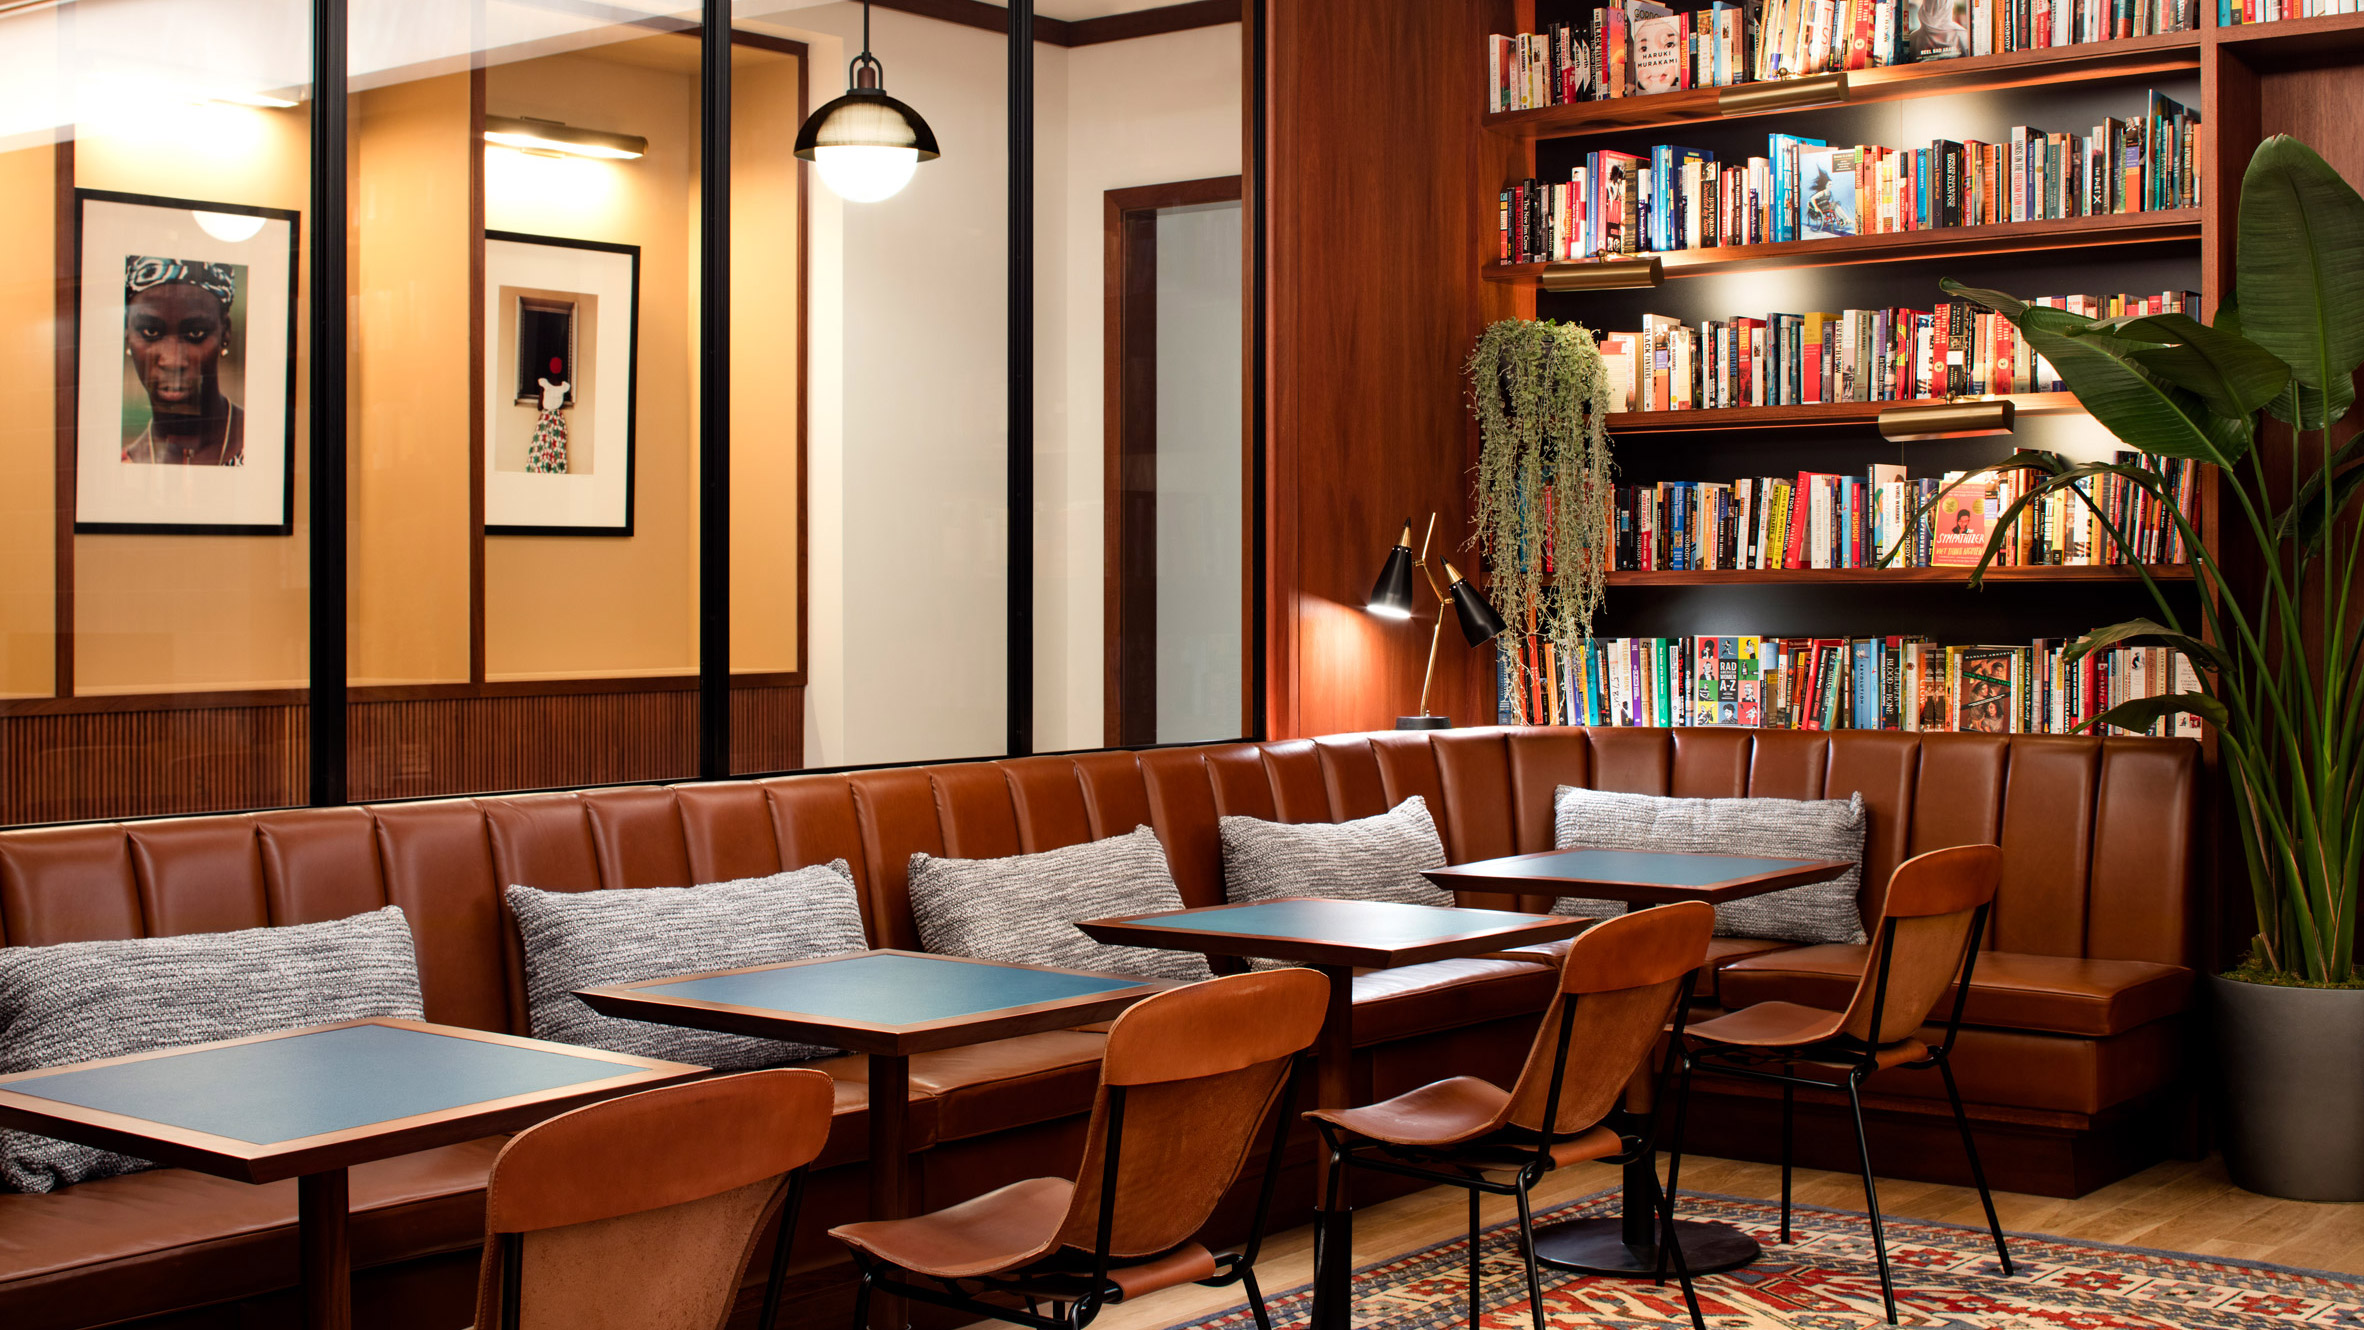 Eaton Dc Hotel Mixes Politically Charged Elements With Retro